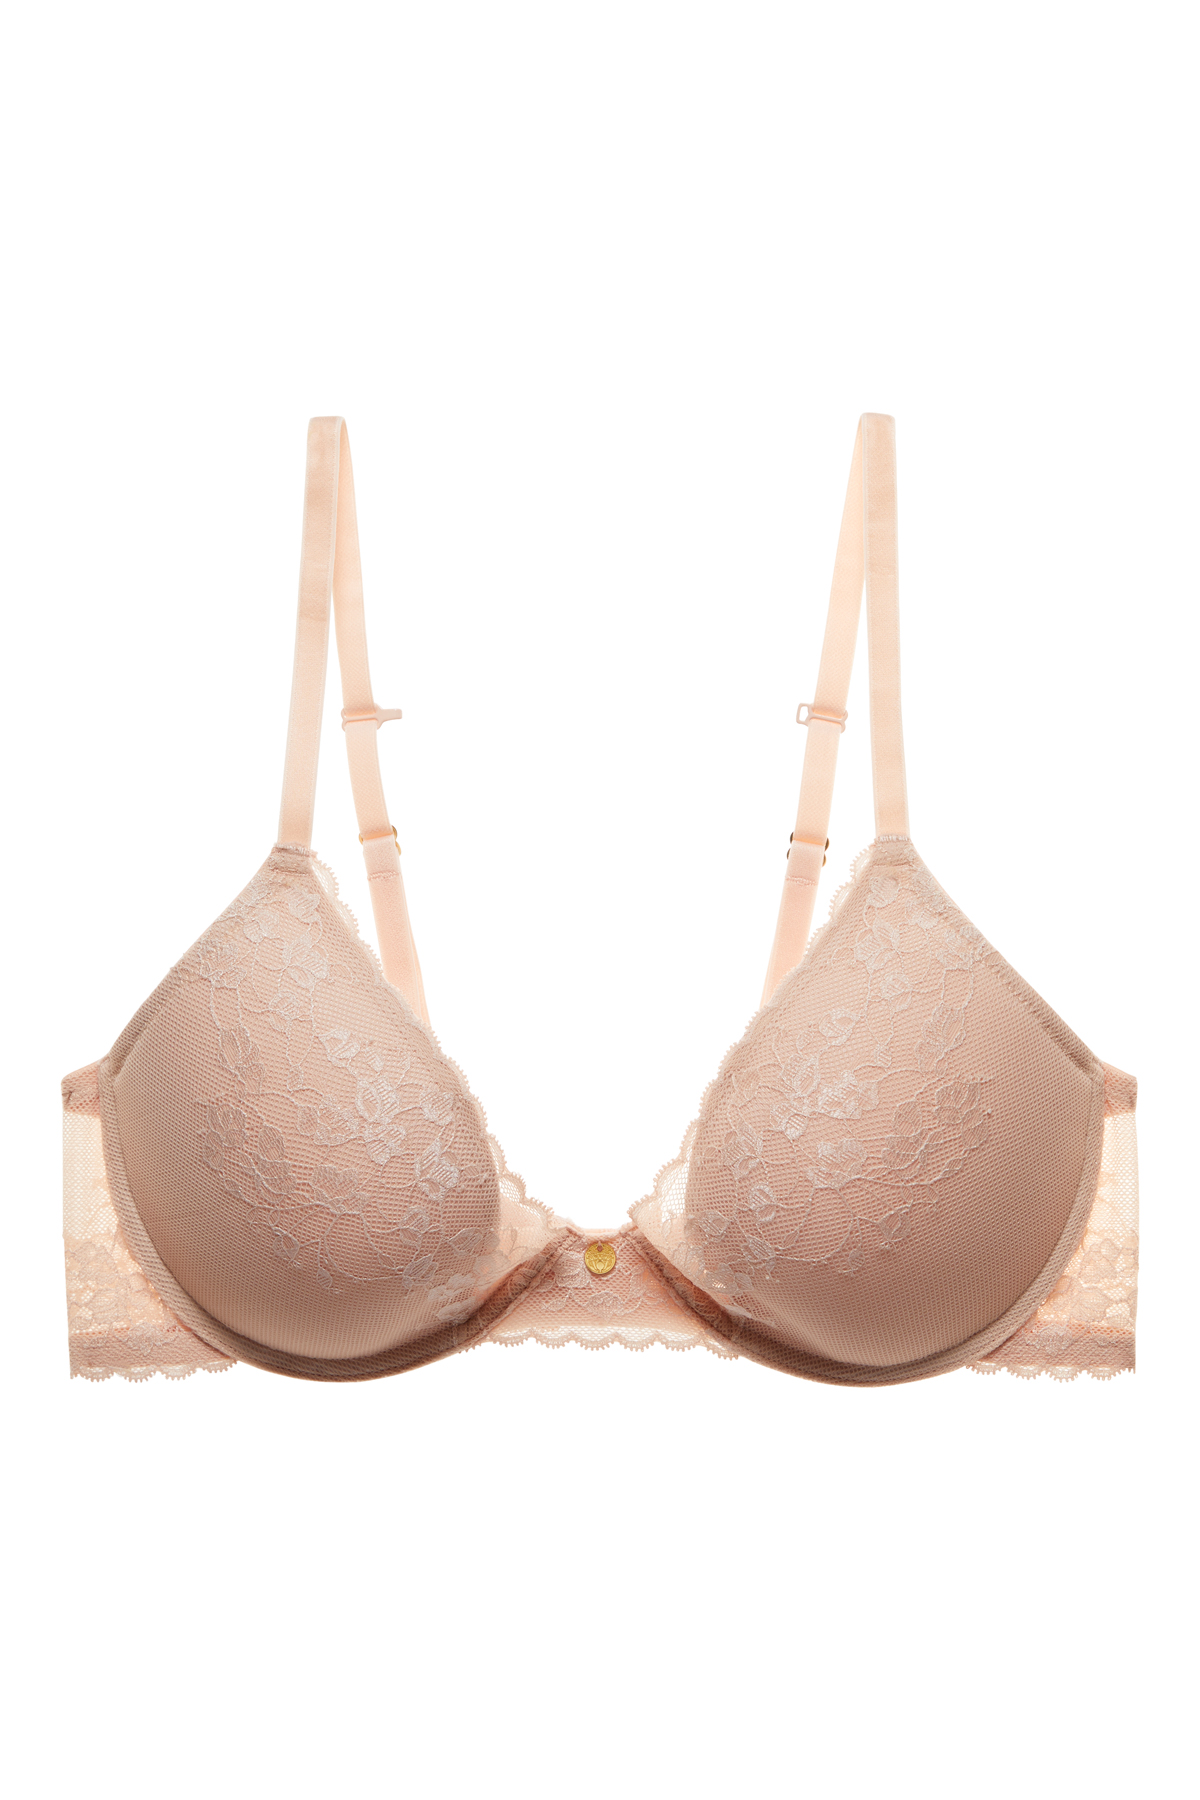 Floral Embroidery Full Coverage Adjustable Push Up Bra - Power Day